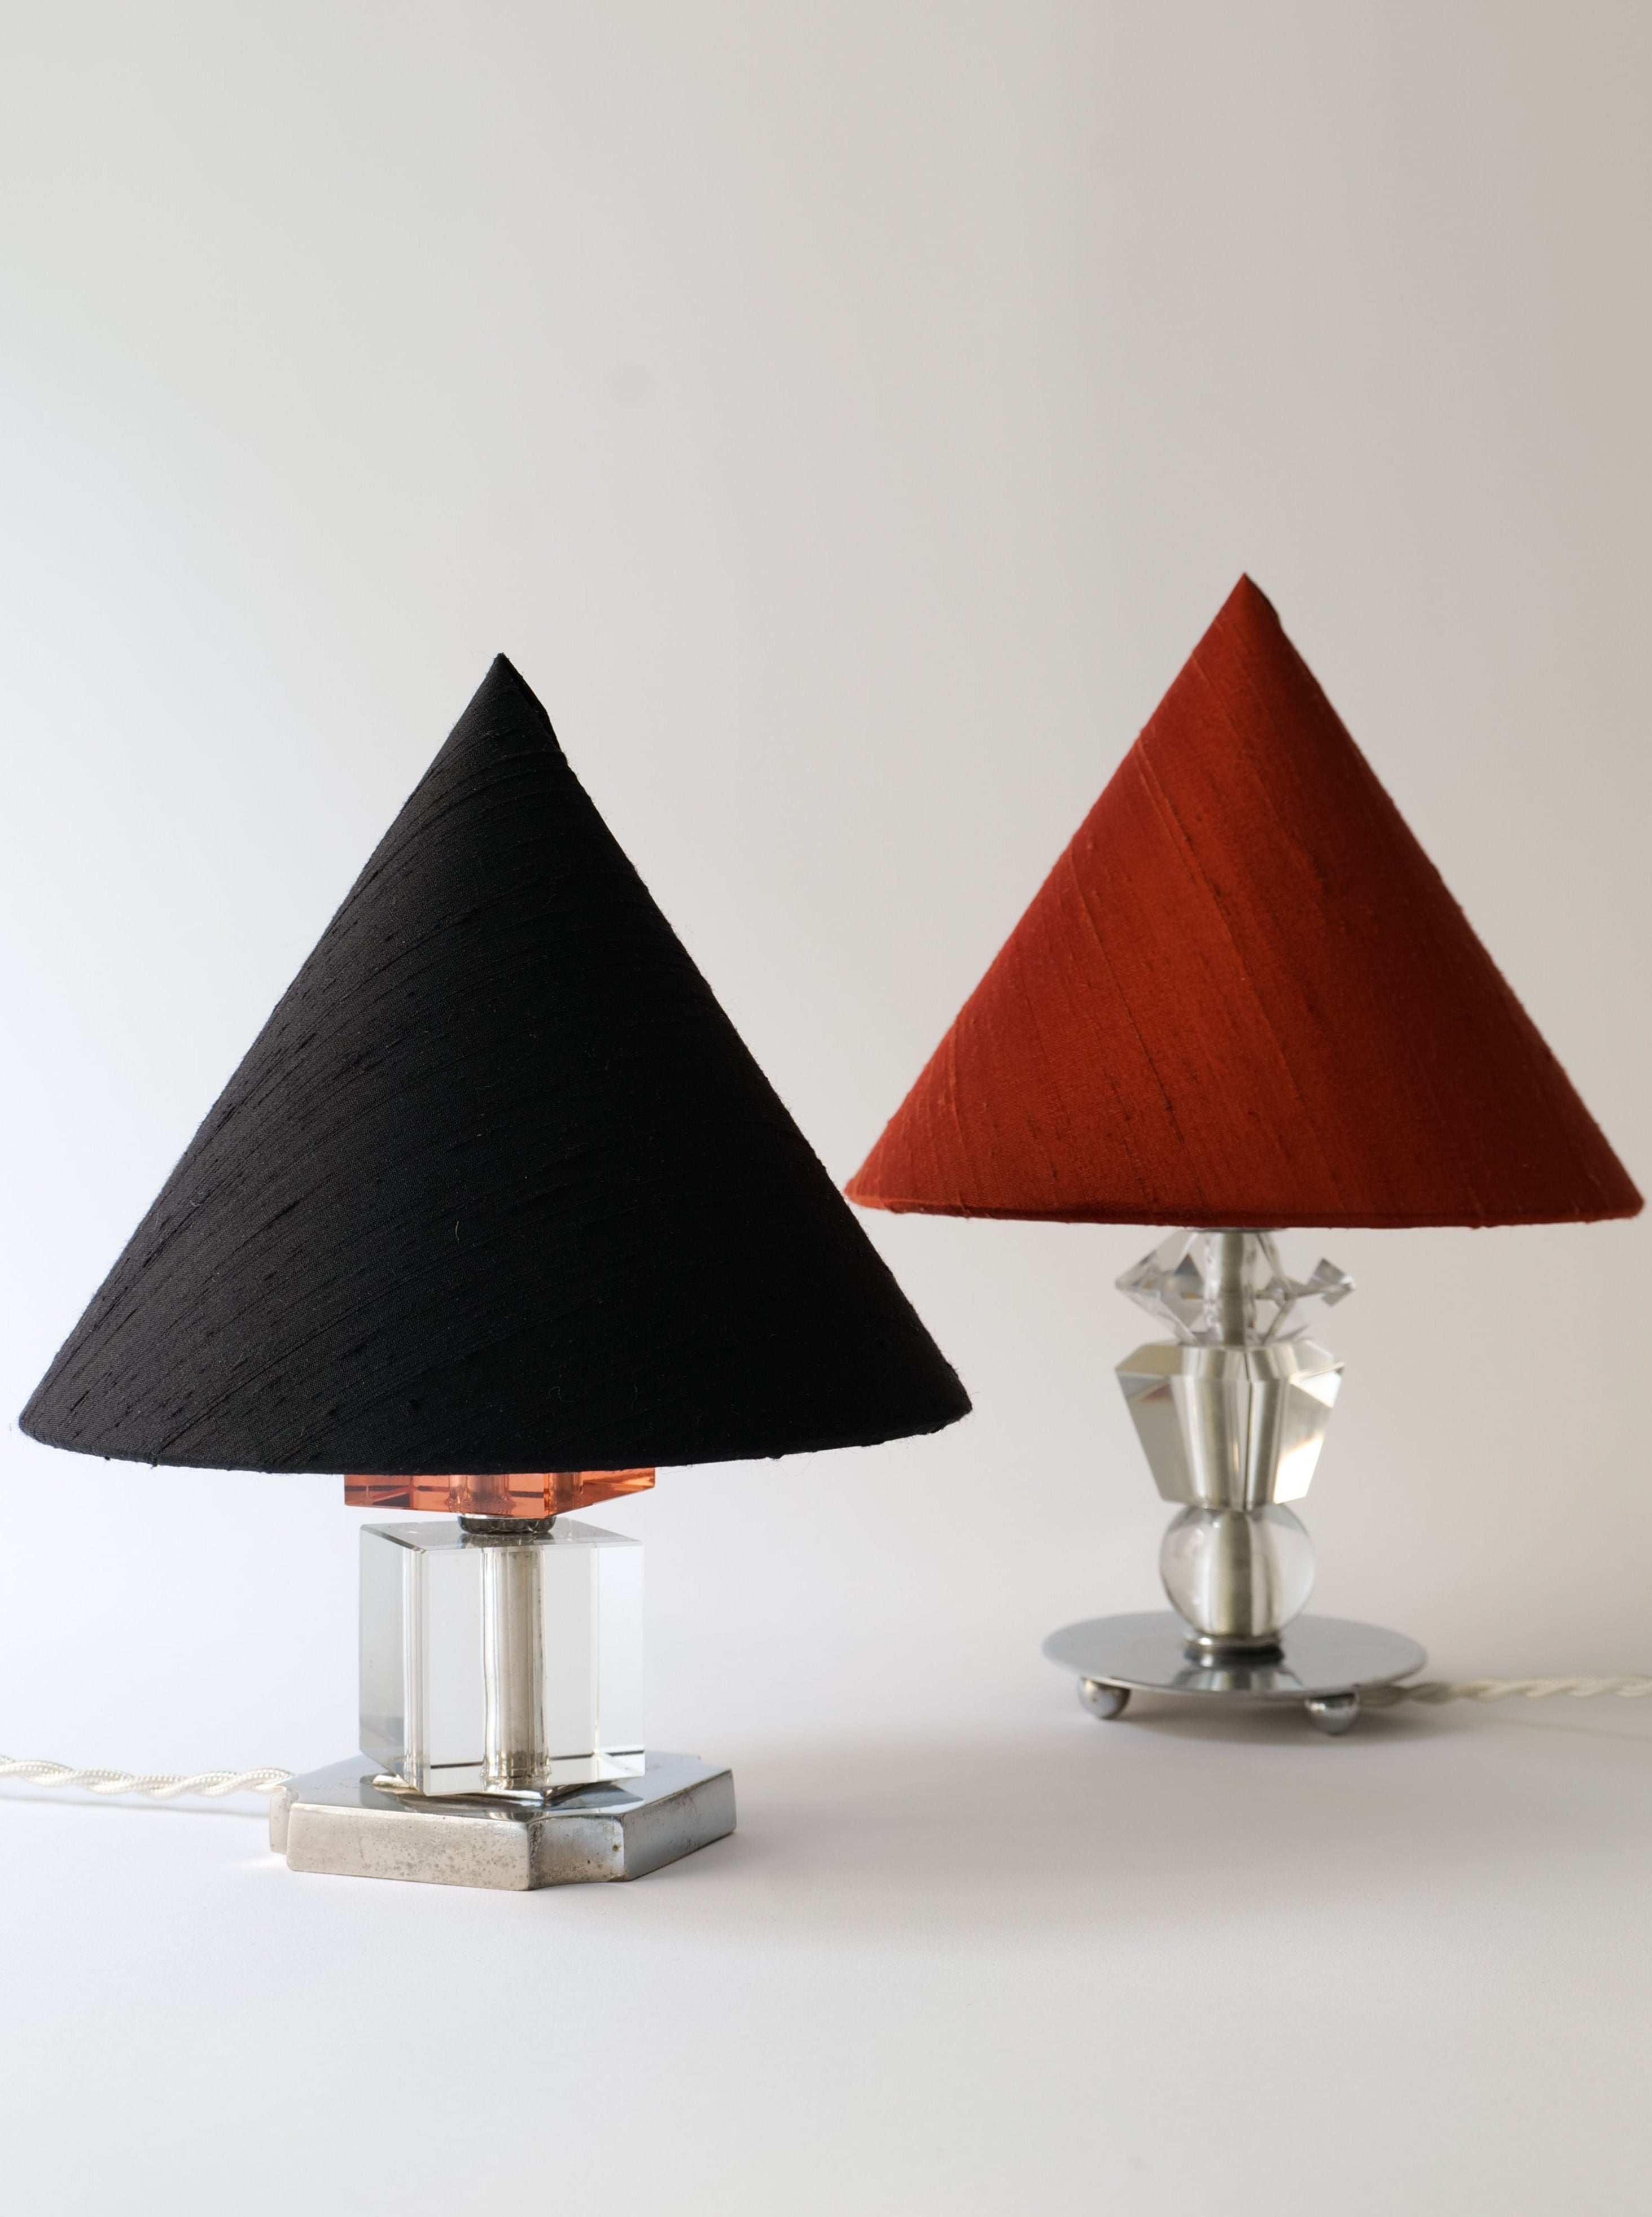 Two Deco Crystal table lamps from the Collection apart line with conical shades, one black and one red, displayed against a neutral background. Each lamp base features a modern metallic and glass design.